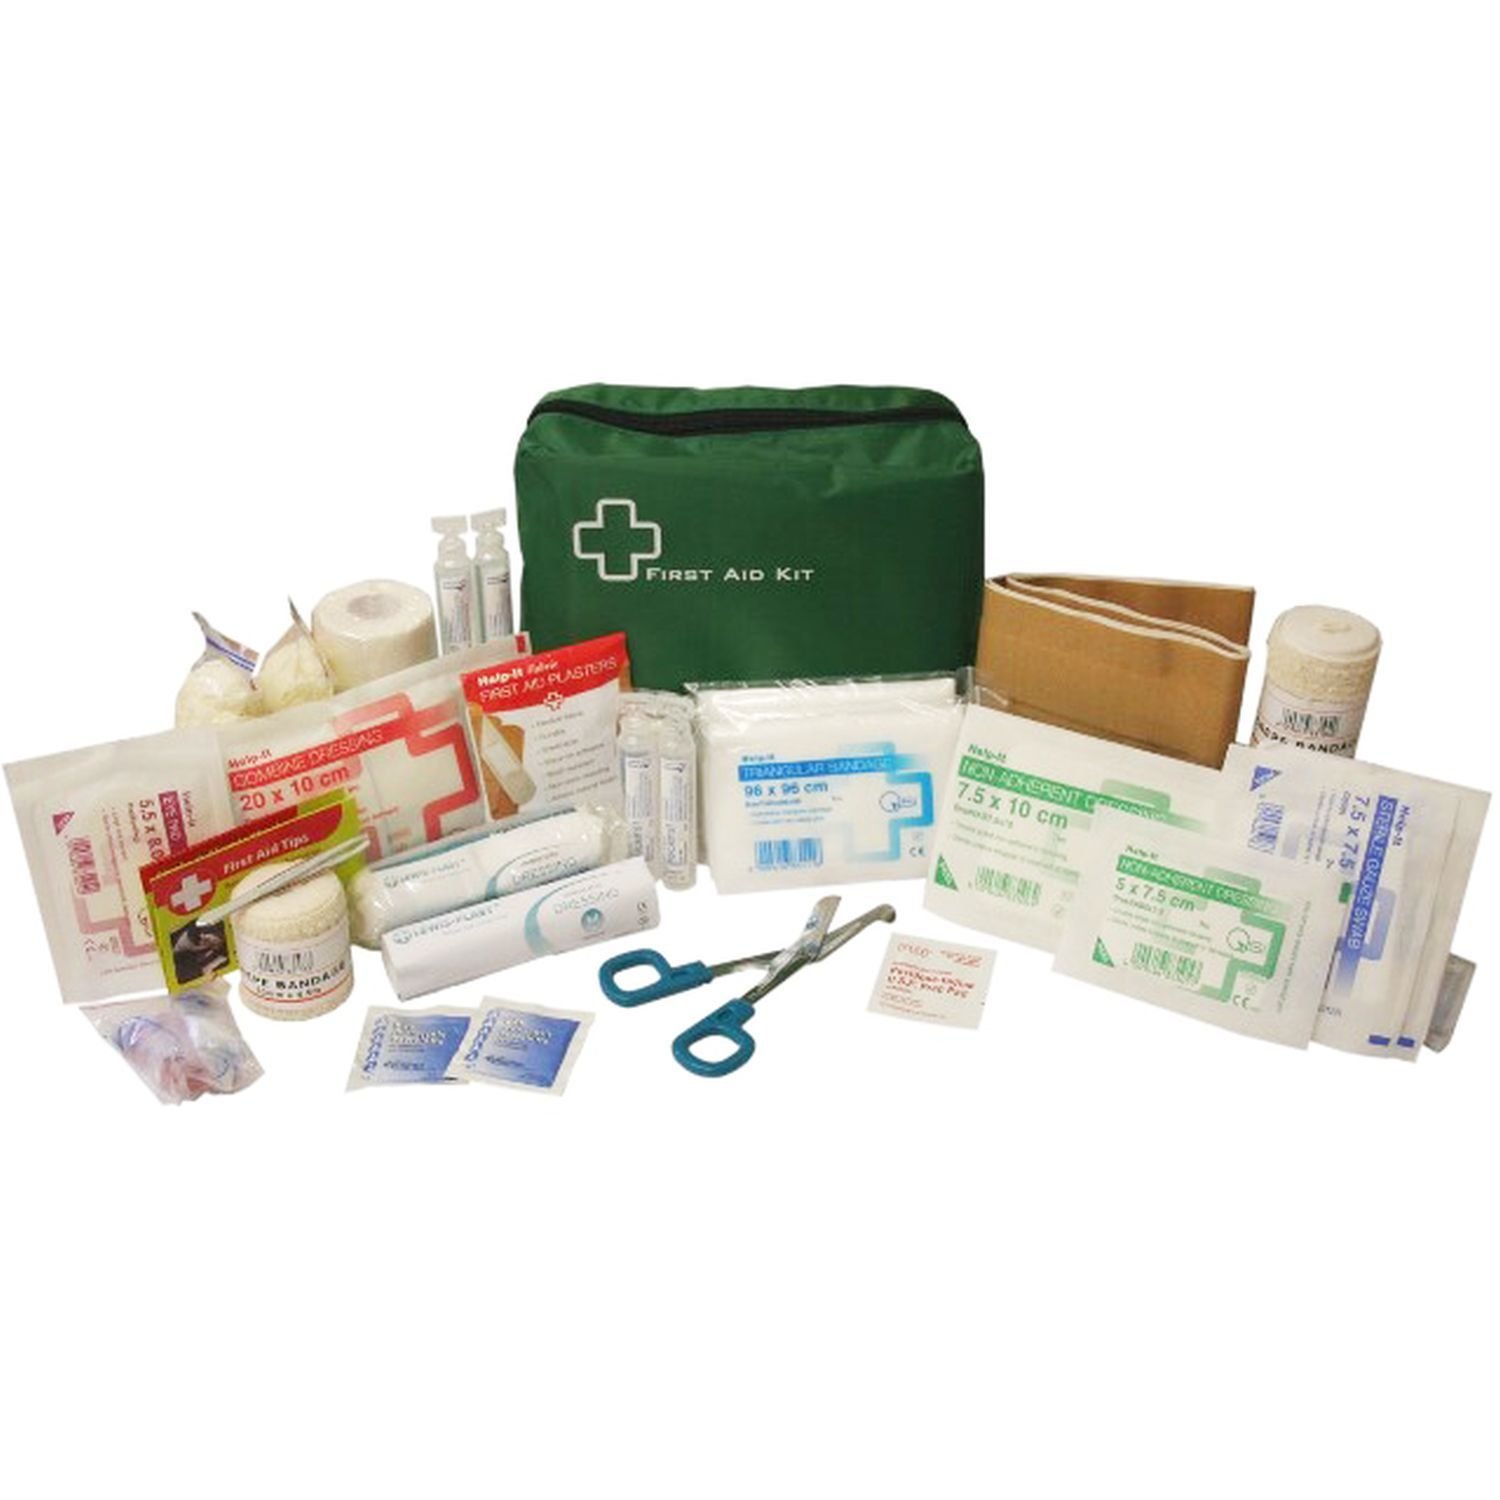 1-5 Worker First Aid Kit - Bag